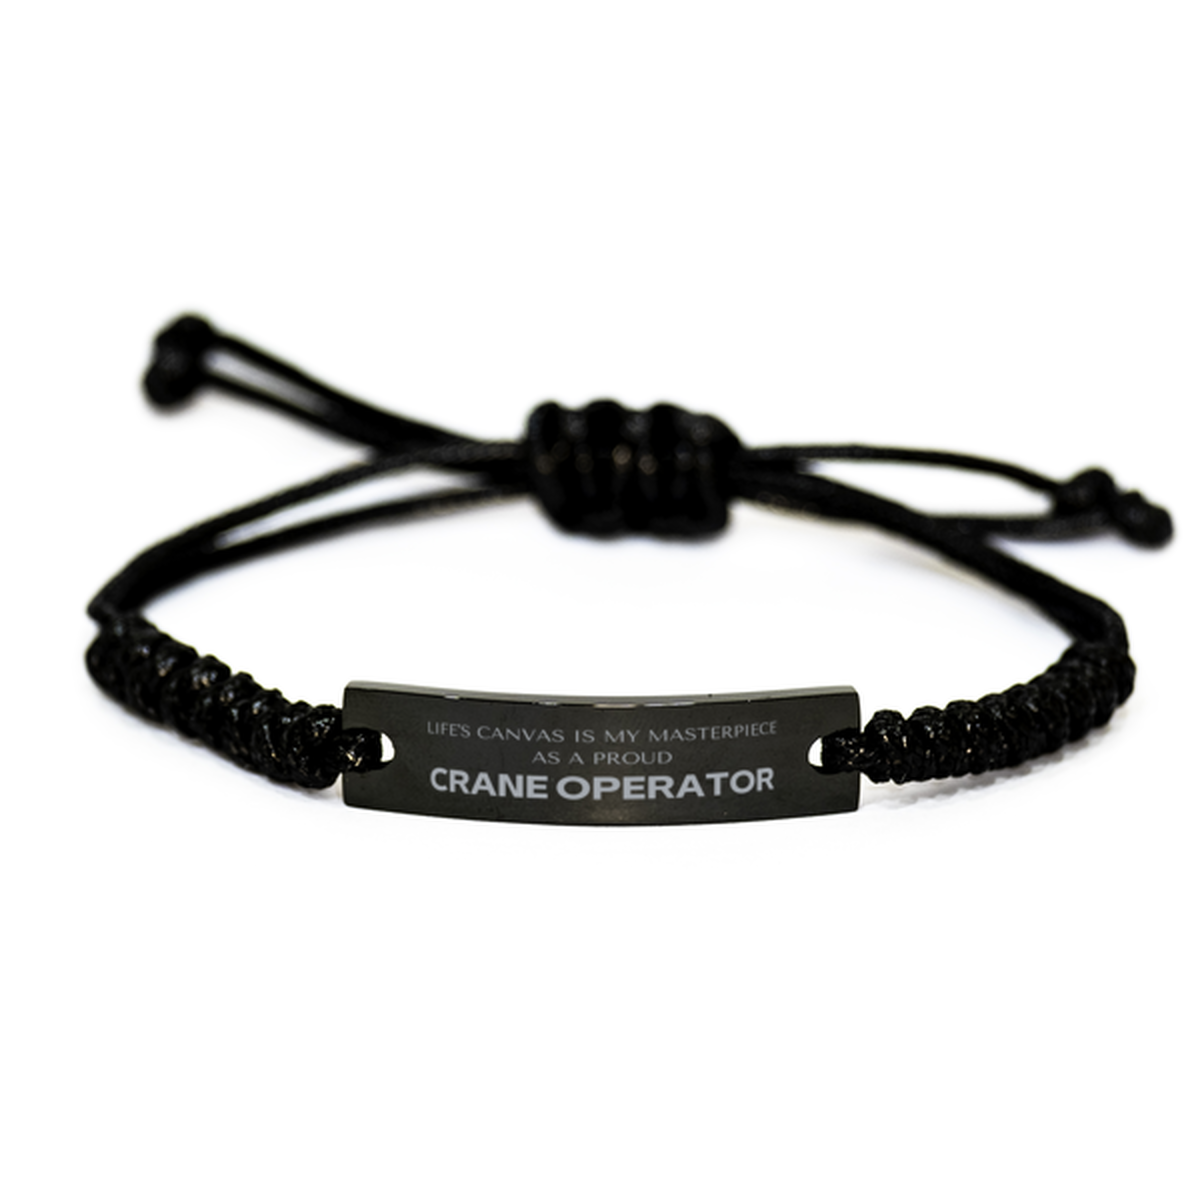 Proud Crane Operator Gifts, Life's canvas is my masterpiece, Epic Birthday Christmas Unique Black Rope Bracelet For Crane Operator, Coworkers, Men, Women, Friends